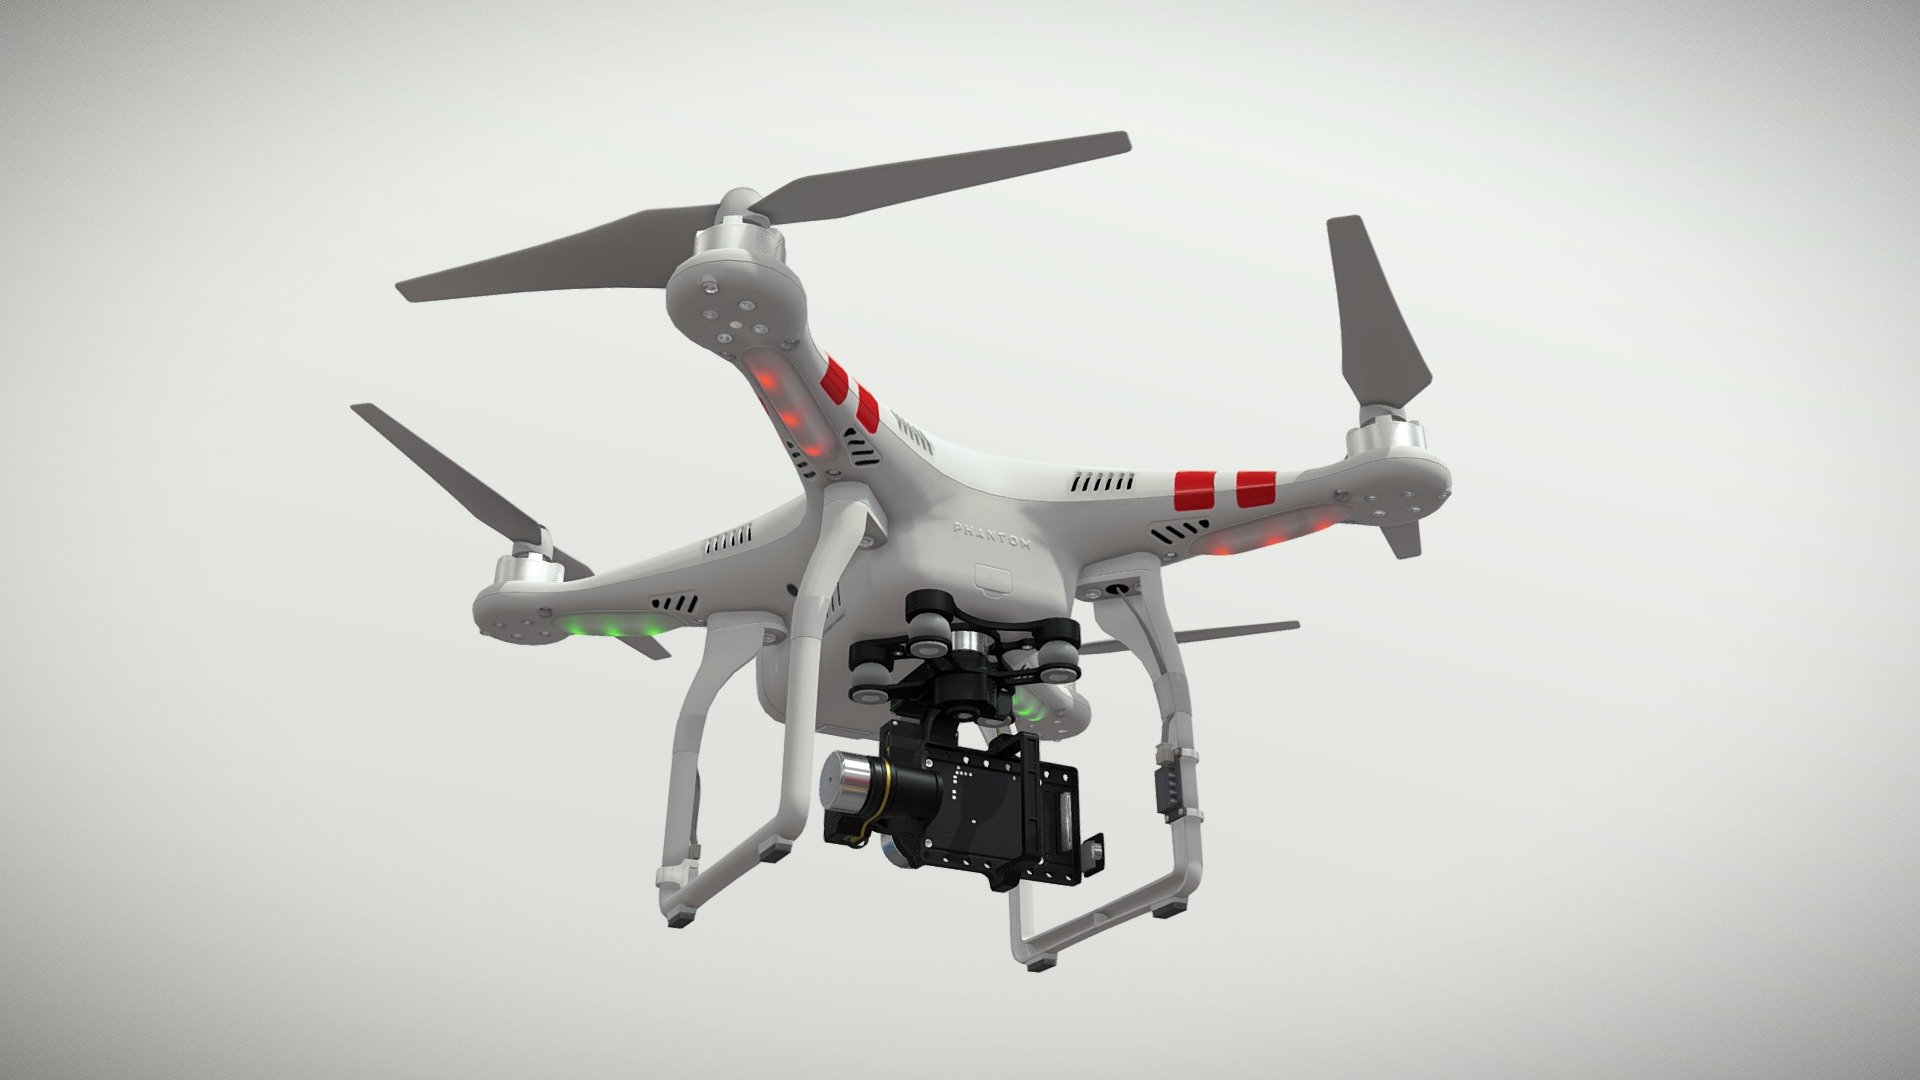 •   Let me present to you high-quality low-poly 3D model DJI Phantom 2 Quadcopter with Zenmuse H4-3D gimbal for GoPro Hero4 or 3. Modeling was made with ortho-photos of real quadcopter and gimbal that is why all details of design are recreated most authentically.

•    This model consists of a few meshes, it is low-polygonal and it has four materials. One material for quadcopter and one for gimbal.

•   The total of the main textures is 9. Resolution of all textures is from 2048 to 4096 pixels square aspect ratio in .png format. Also there is original texture file .PSD format in separate archive.

•   Polygon count of the model is – 20860.

•   The model has correct dimensions in real-world scale. All parts named correctly.

•   To use the model in other 3D programs there are scenes in formats .fbx, .obj, .DAE, .max (2010 version).

Note: If you see some artifacts on the textures, it means compression works in the Viewer. We recommend setting HD quality for textures. But anyway, original textures have no artifacts 3d model